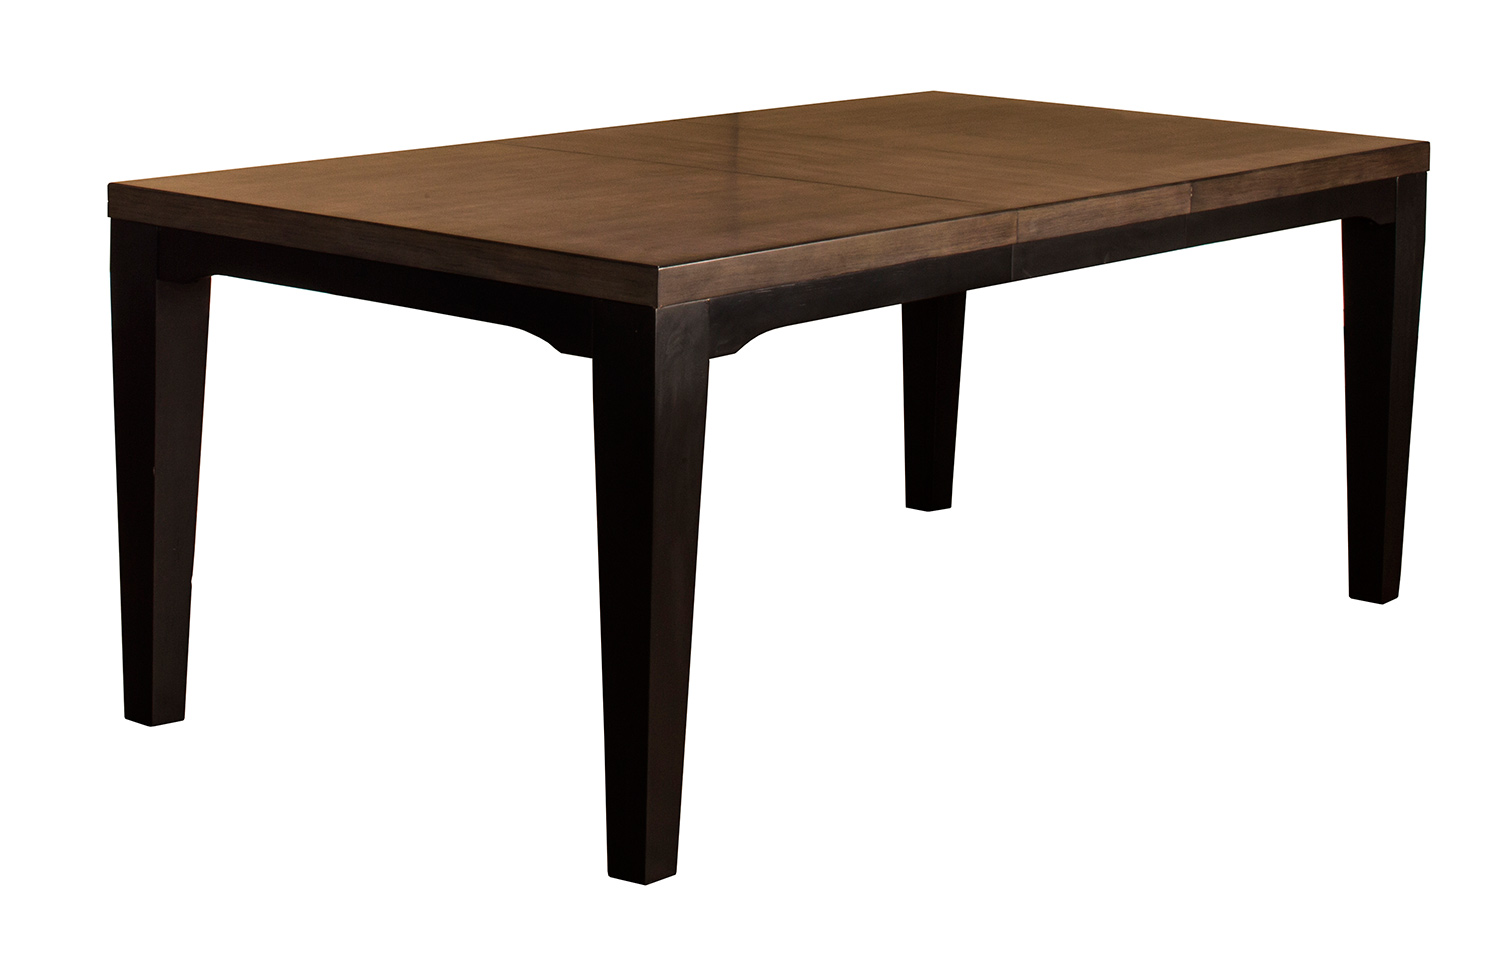 Hillsdale Sheridan Extension Dining Table - Black/Gray